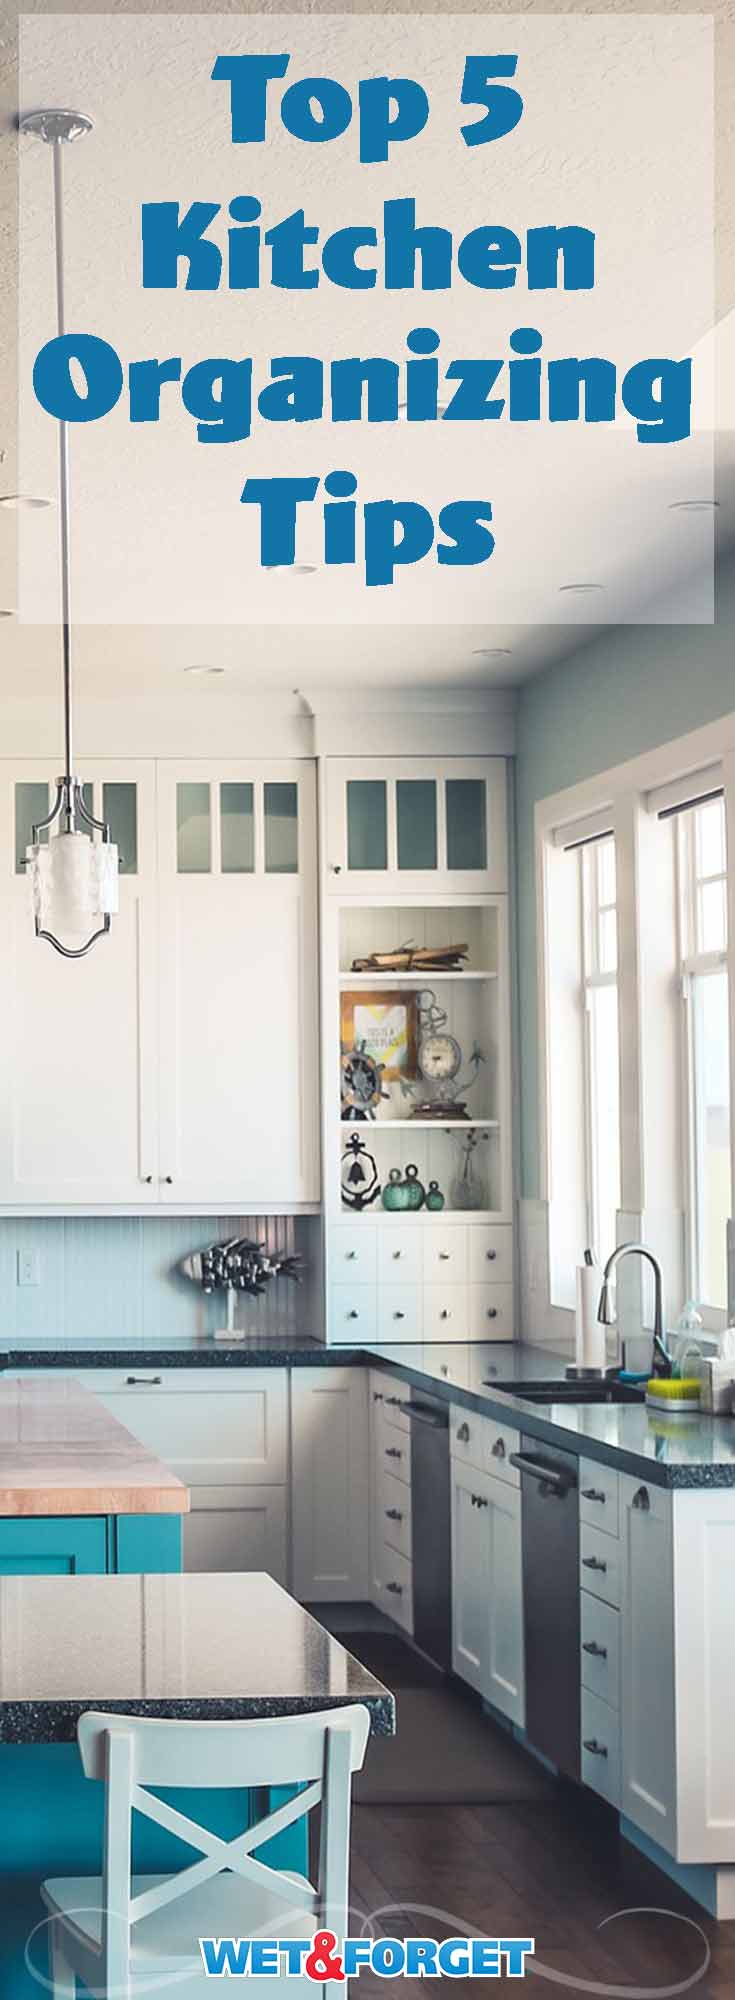 Kitchens can get quite cluttered very easily. Keep your kitchen organized and de-cluttered with these top organizing tips! 